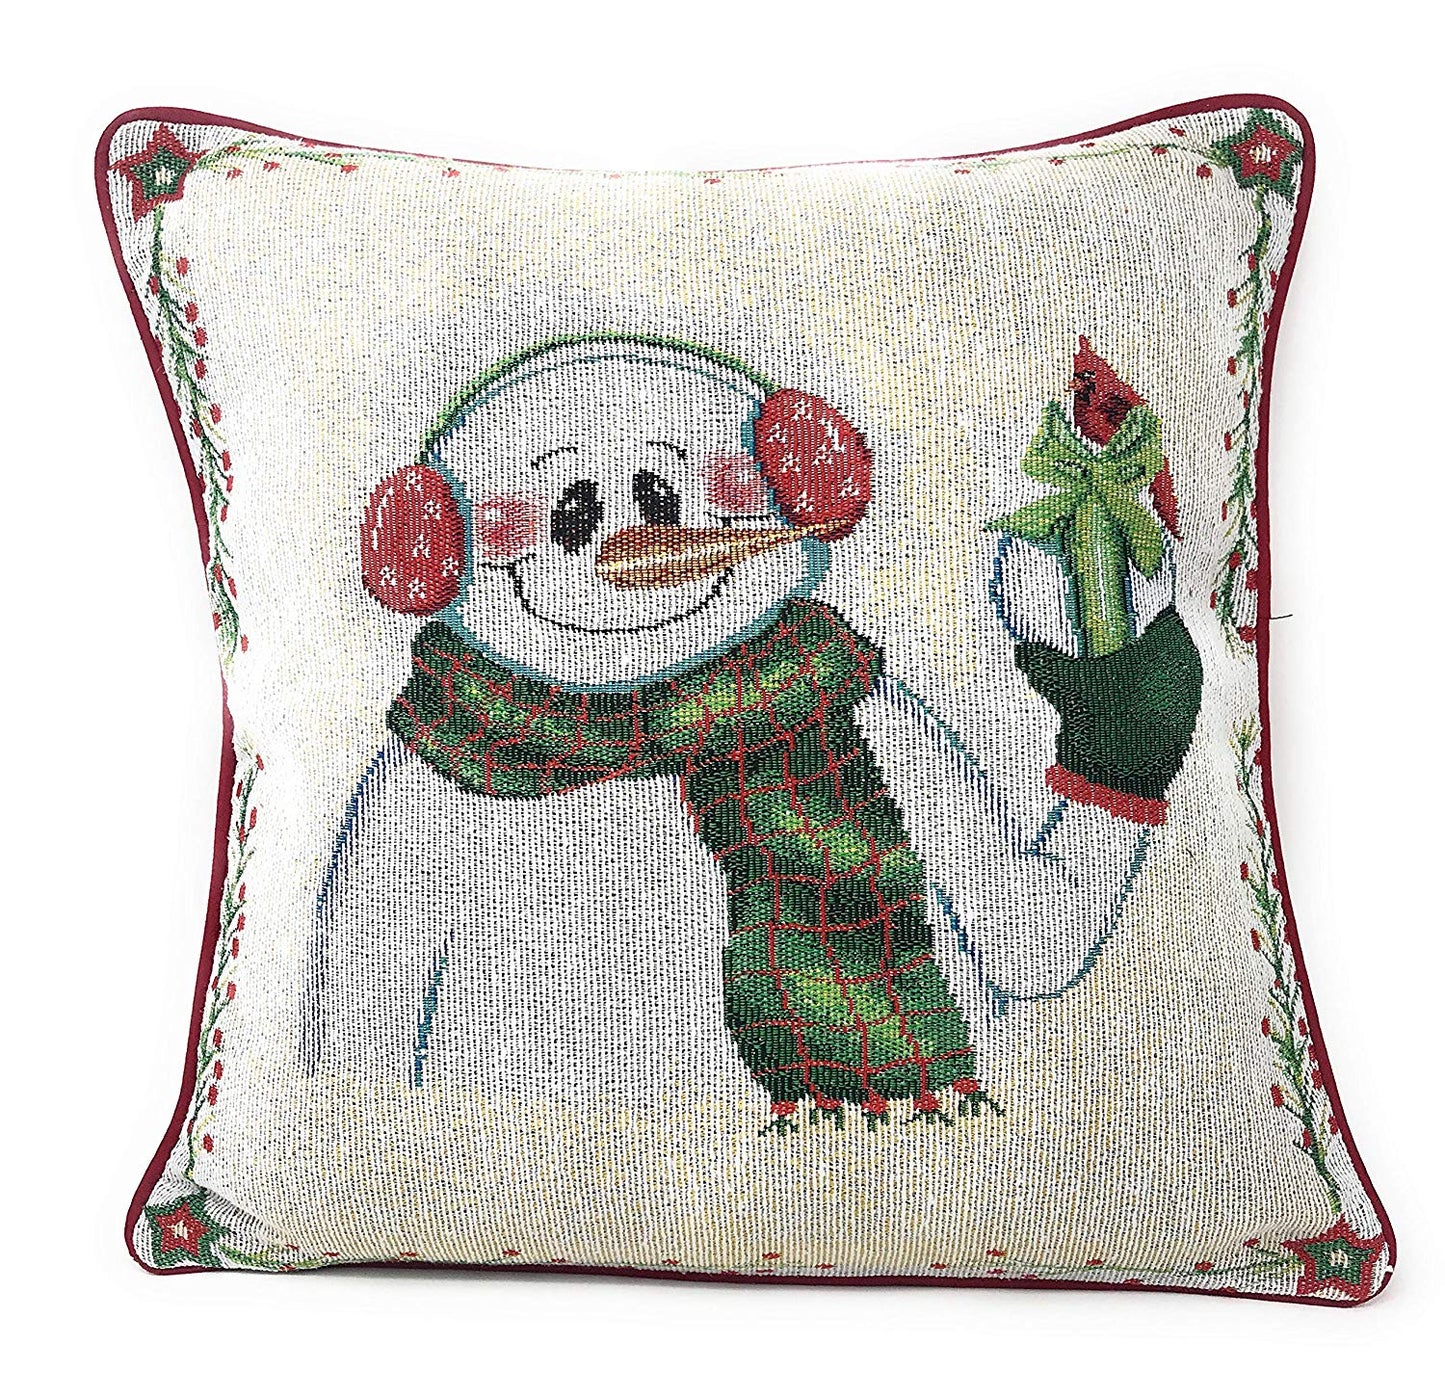 Magical Snowman Throw Pillow Cover Tapestry Cushion Cases 16" x 16" (9733)